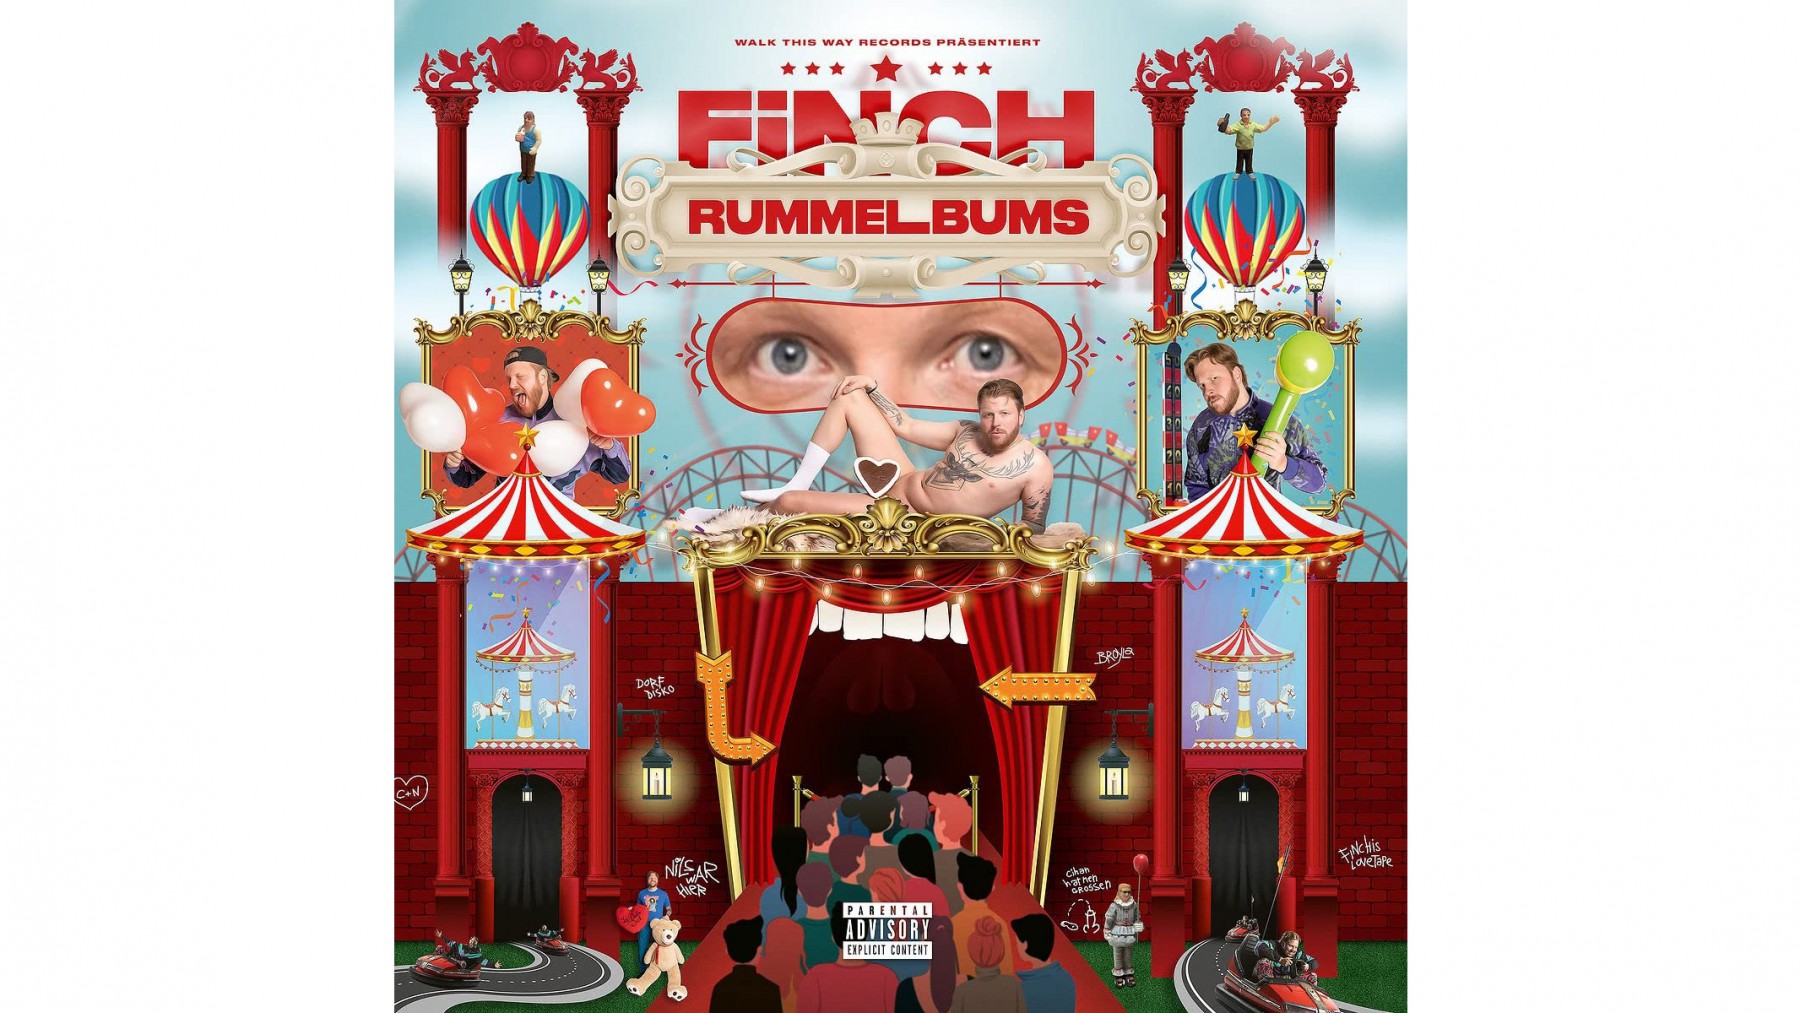 Rummelbums by Finch